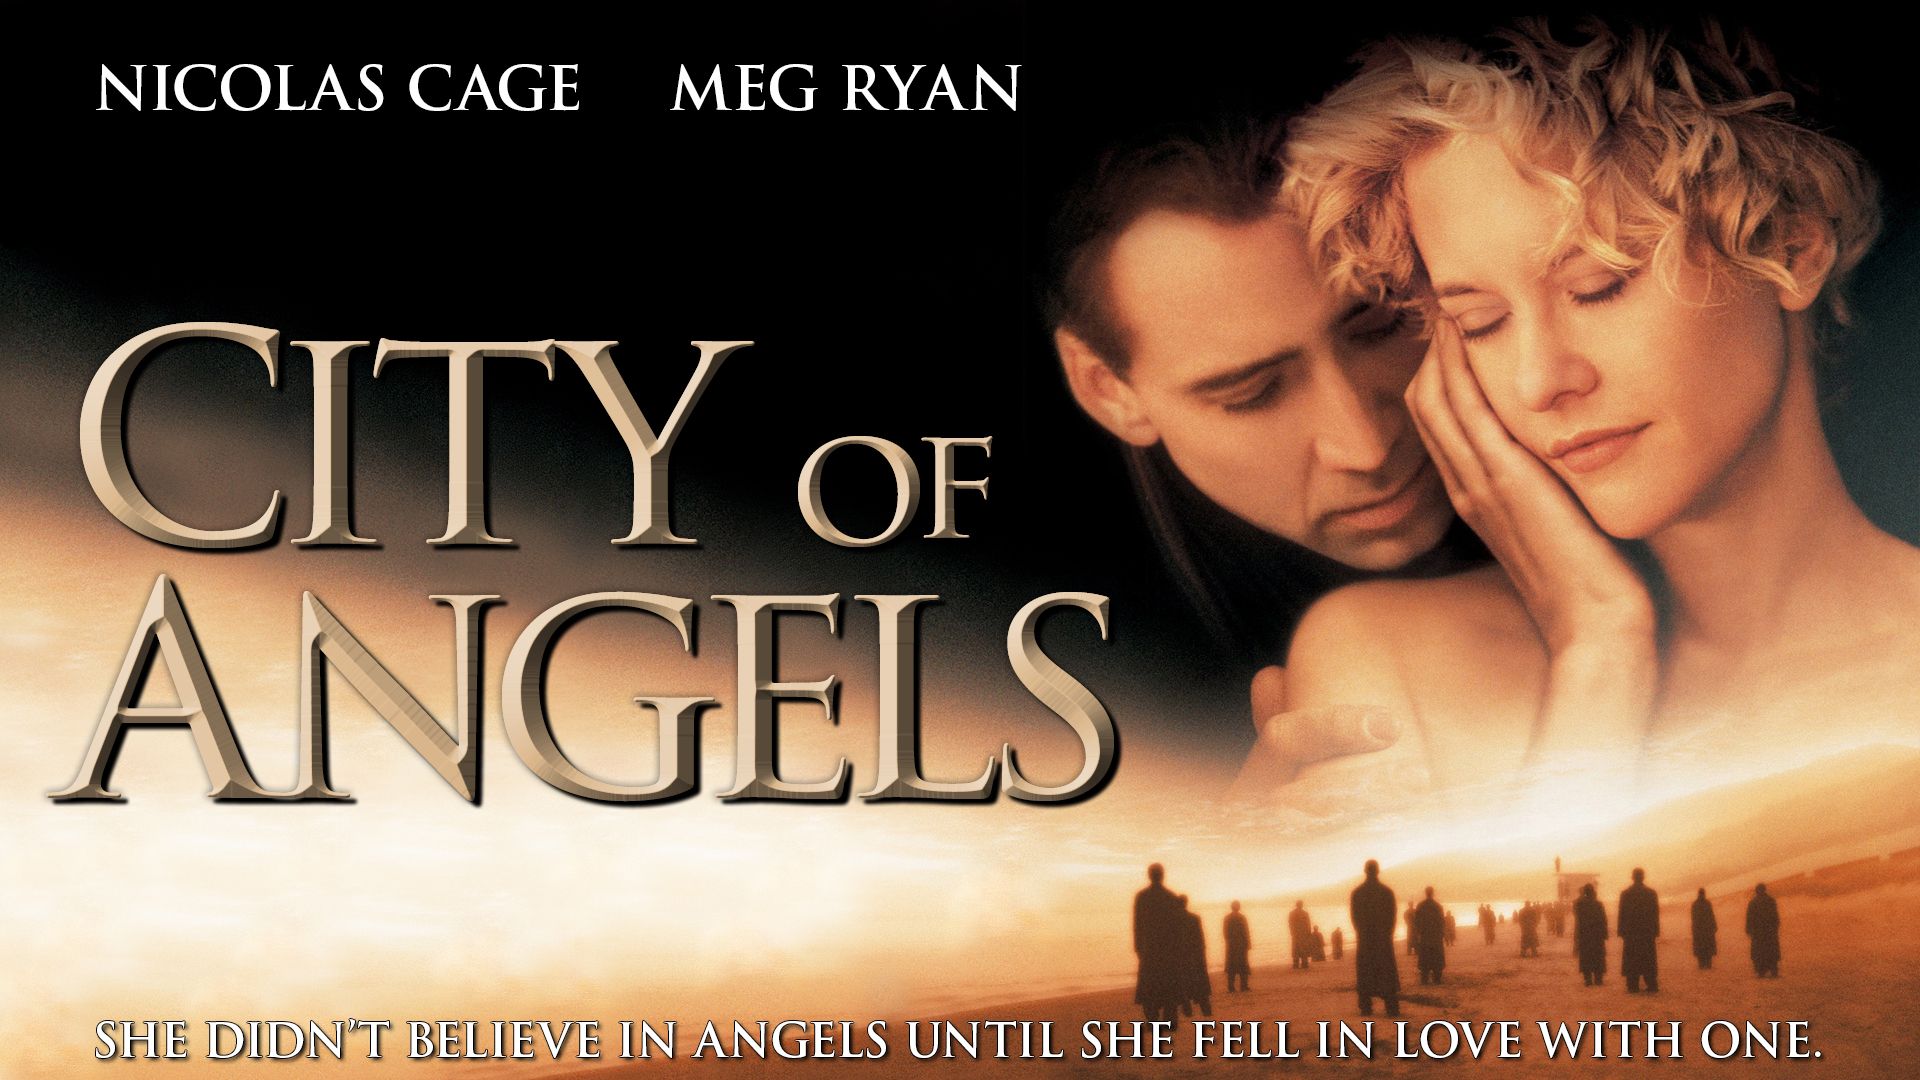 Nicholas Cage and Meg Ryan in City of Angels